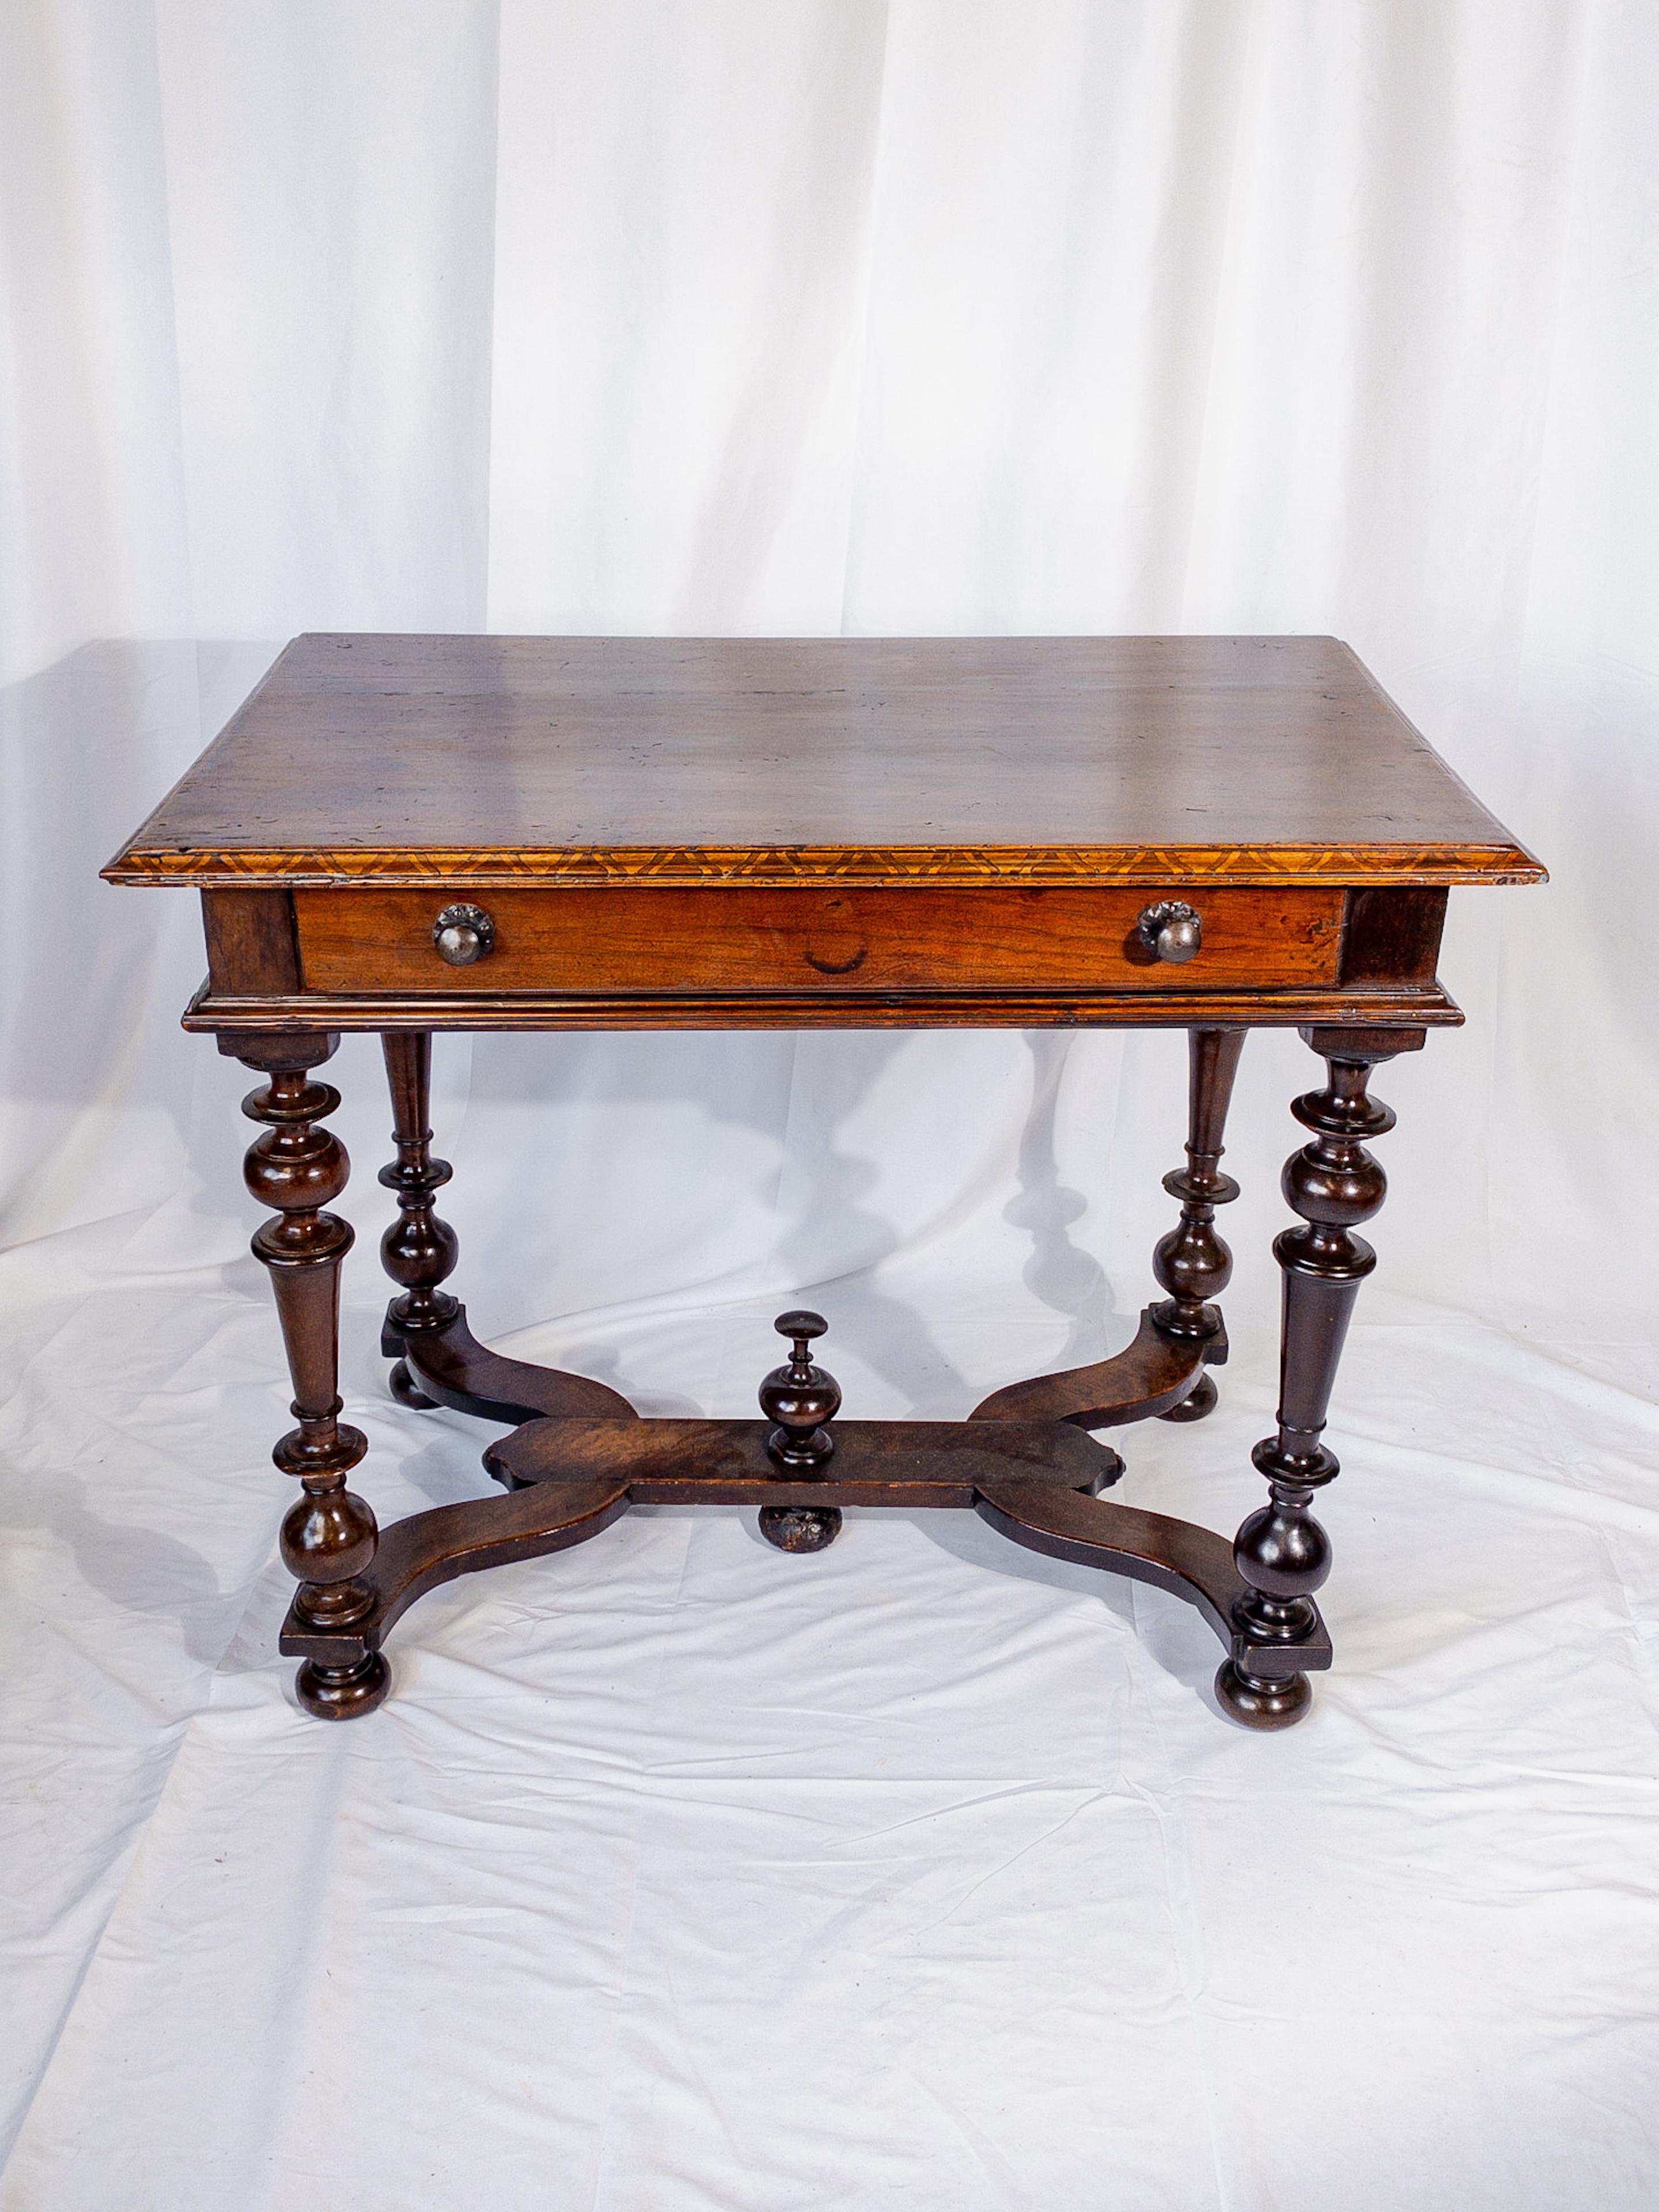 The 19th Century Italian Side Table with Walnut Marquetry Trim epitomizes the refined elegance of the era. Crafted with precision and artistry, this table boasts a rich walnut marquetry trim adorning its perimeter, showcasing intricate patterns and